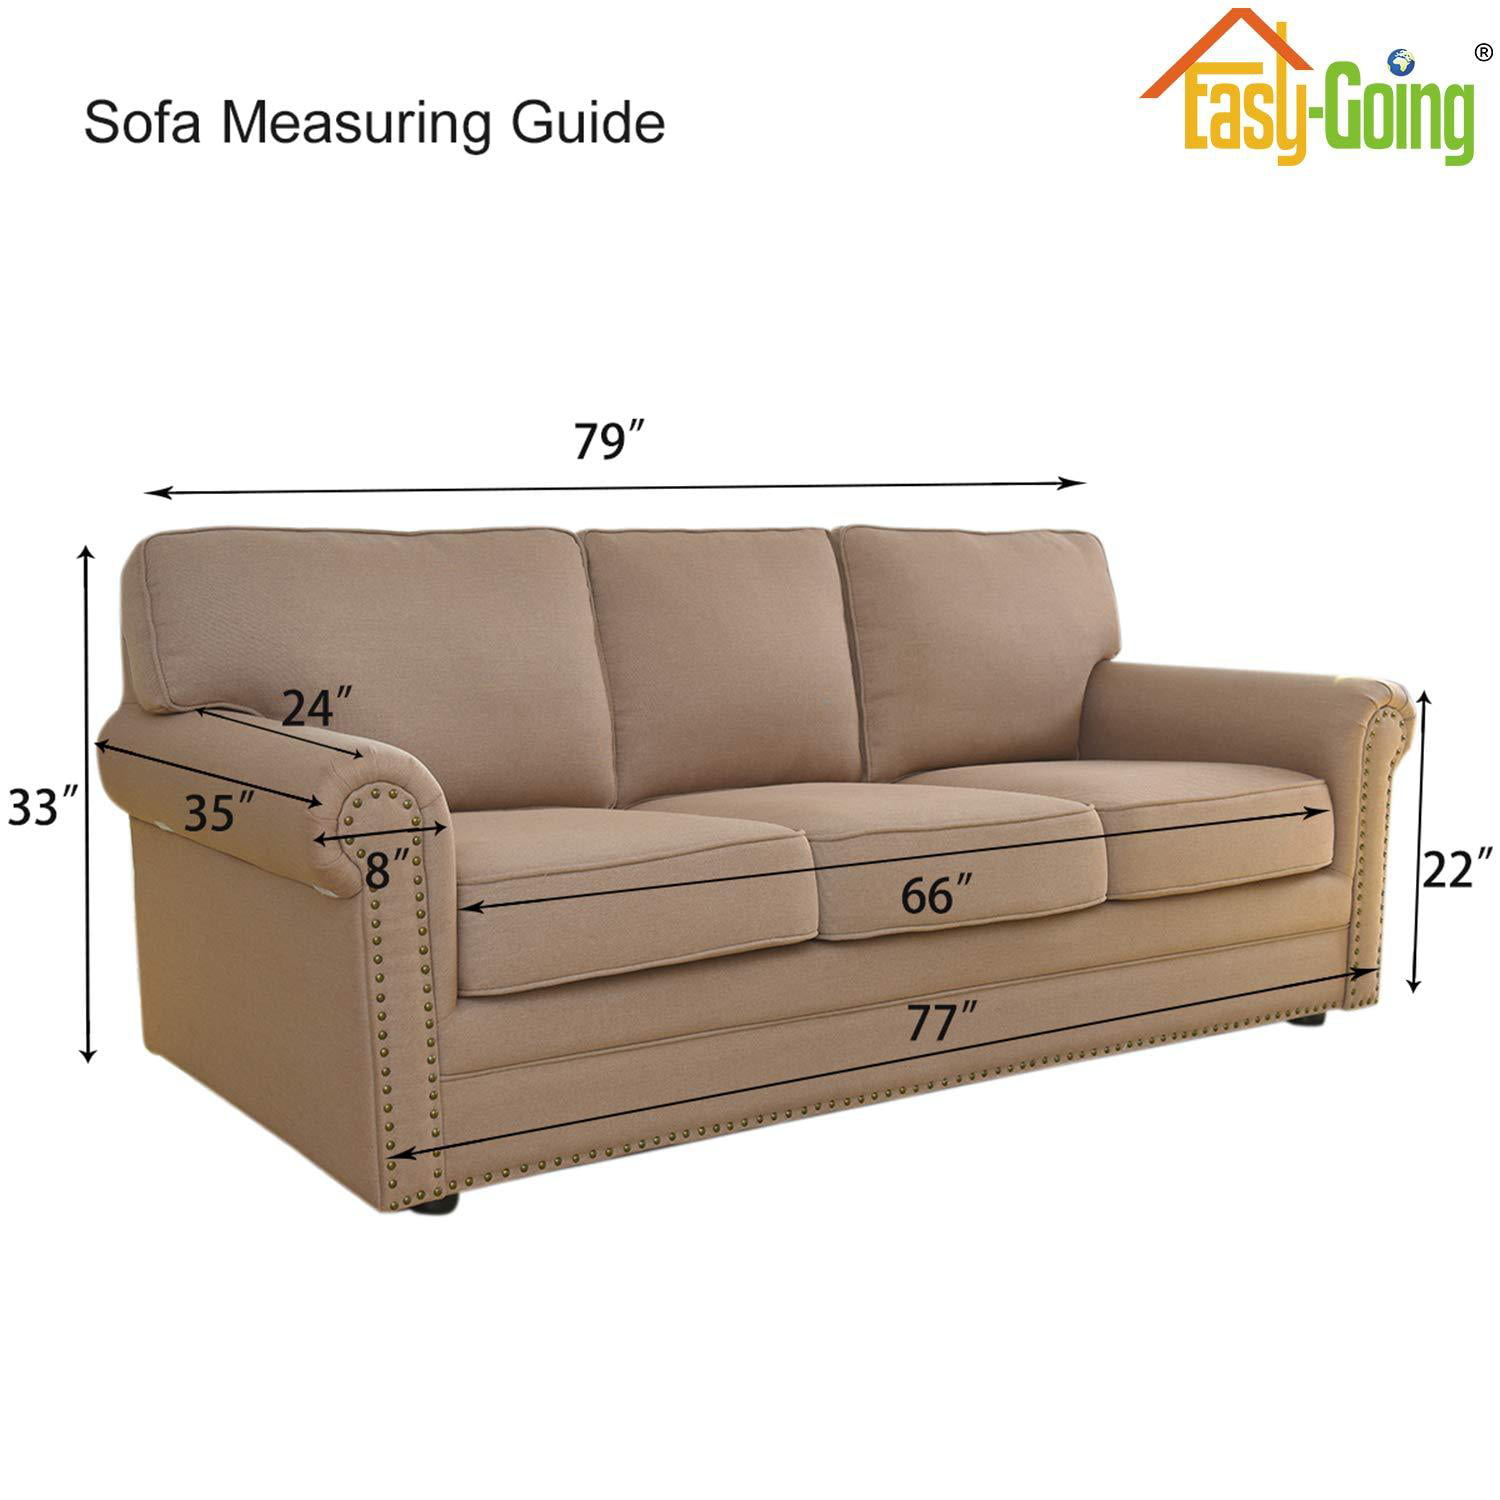 Easy-Going Stretch Sofa Slipcover 1-Piece Couch Sofa Cover